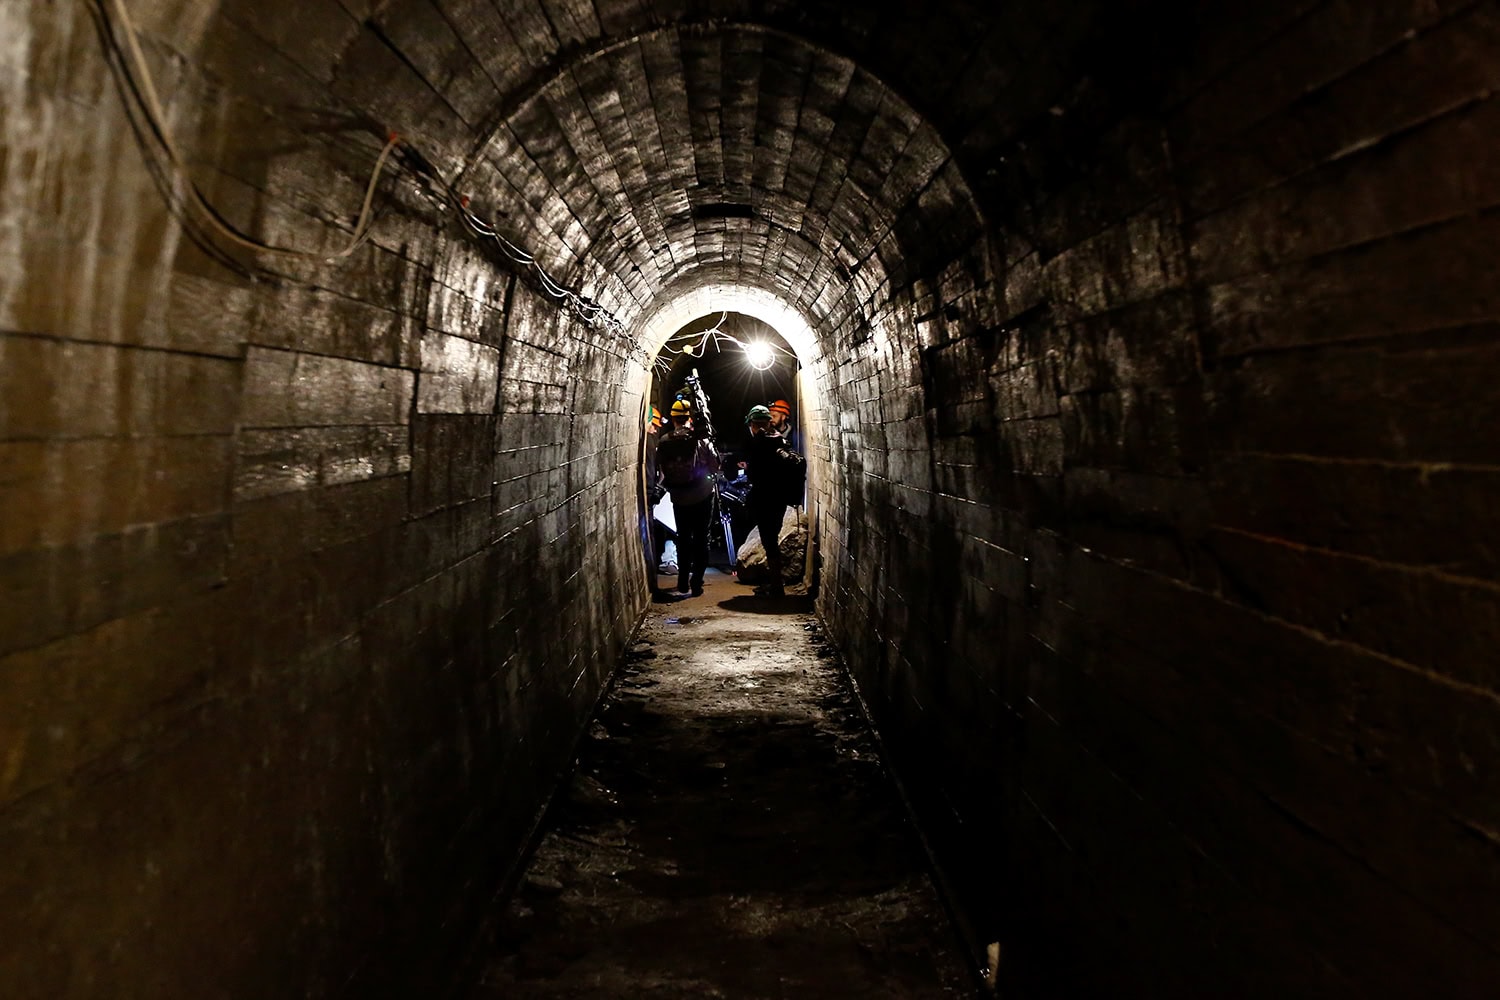 Search for legendary Nazi ‘gold train’ begins